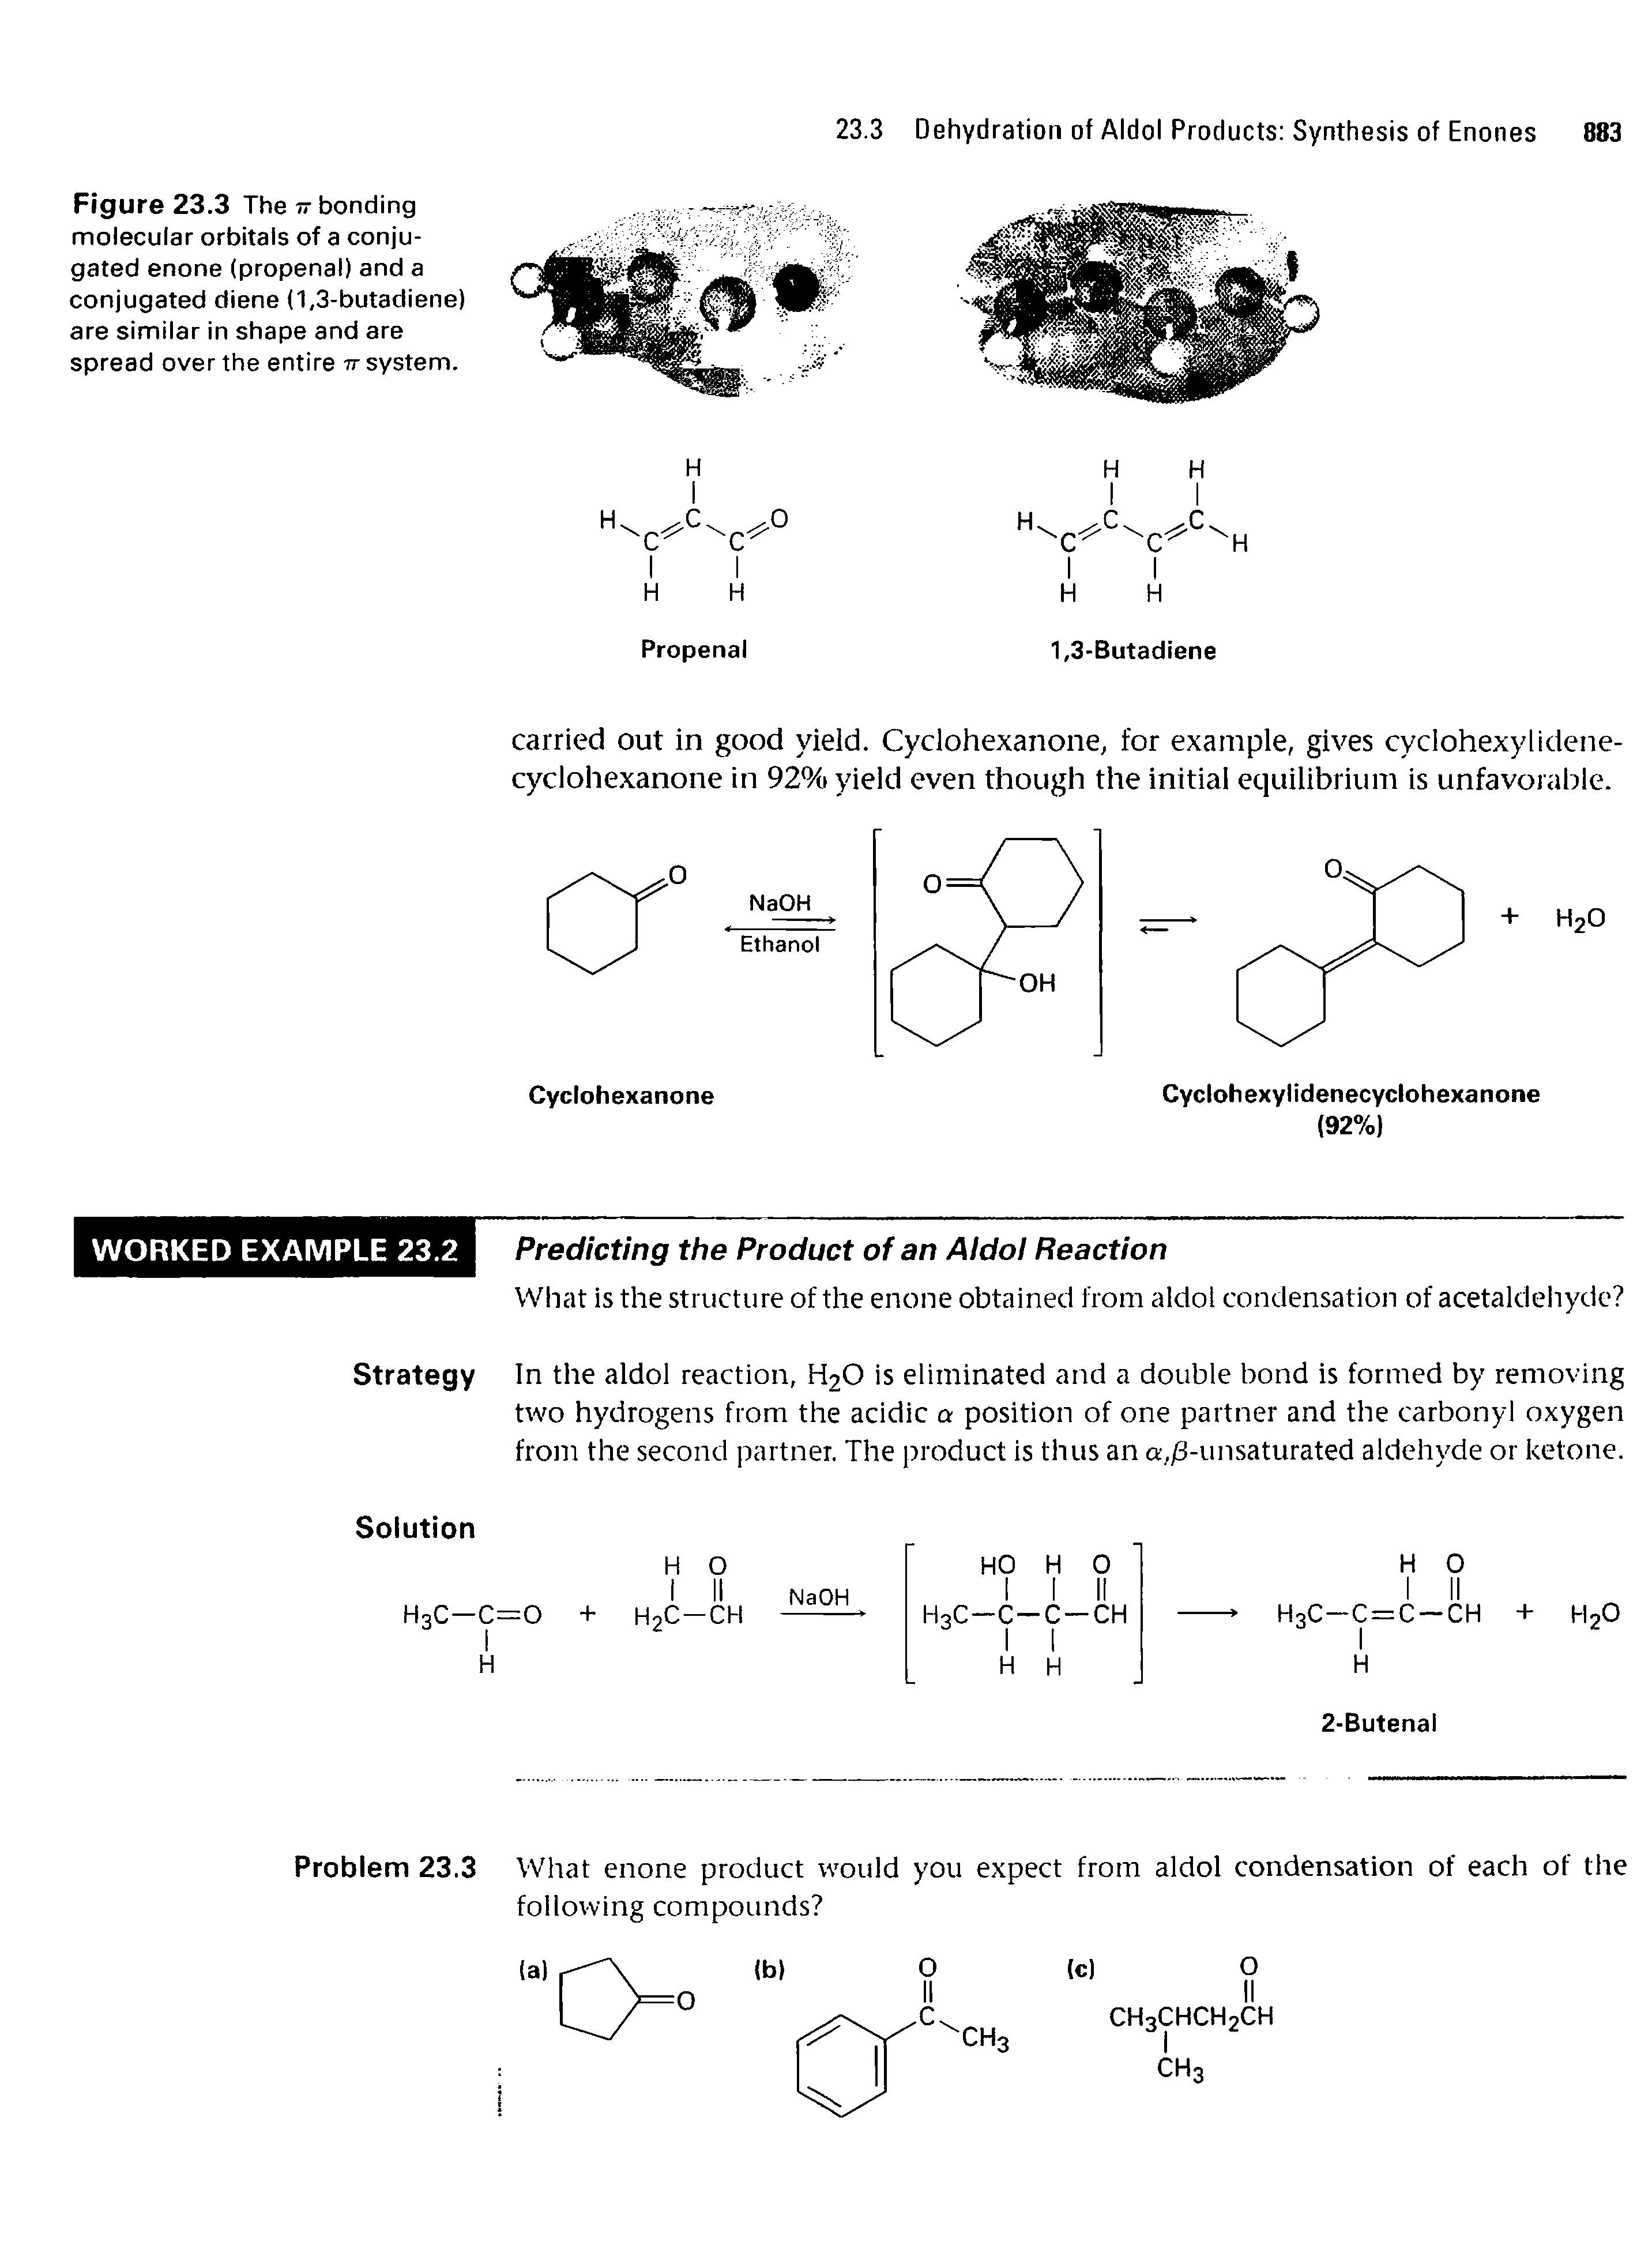 Figure 23.3 The tt bonding molecular orbitals of a conjugated enone (propenal) and a conjugated diene (1,3-butadiene) are similar in shape and are spread over the entire tt system.